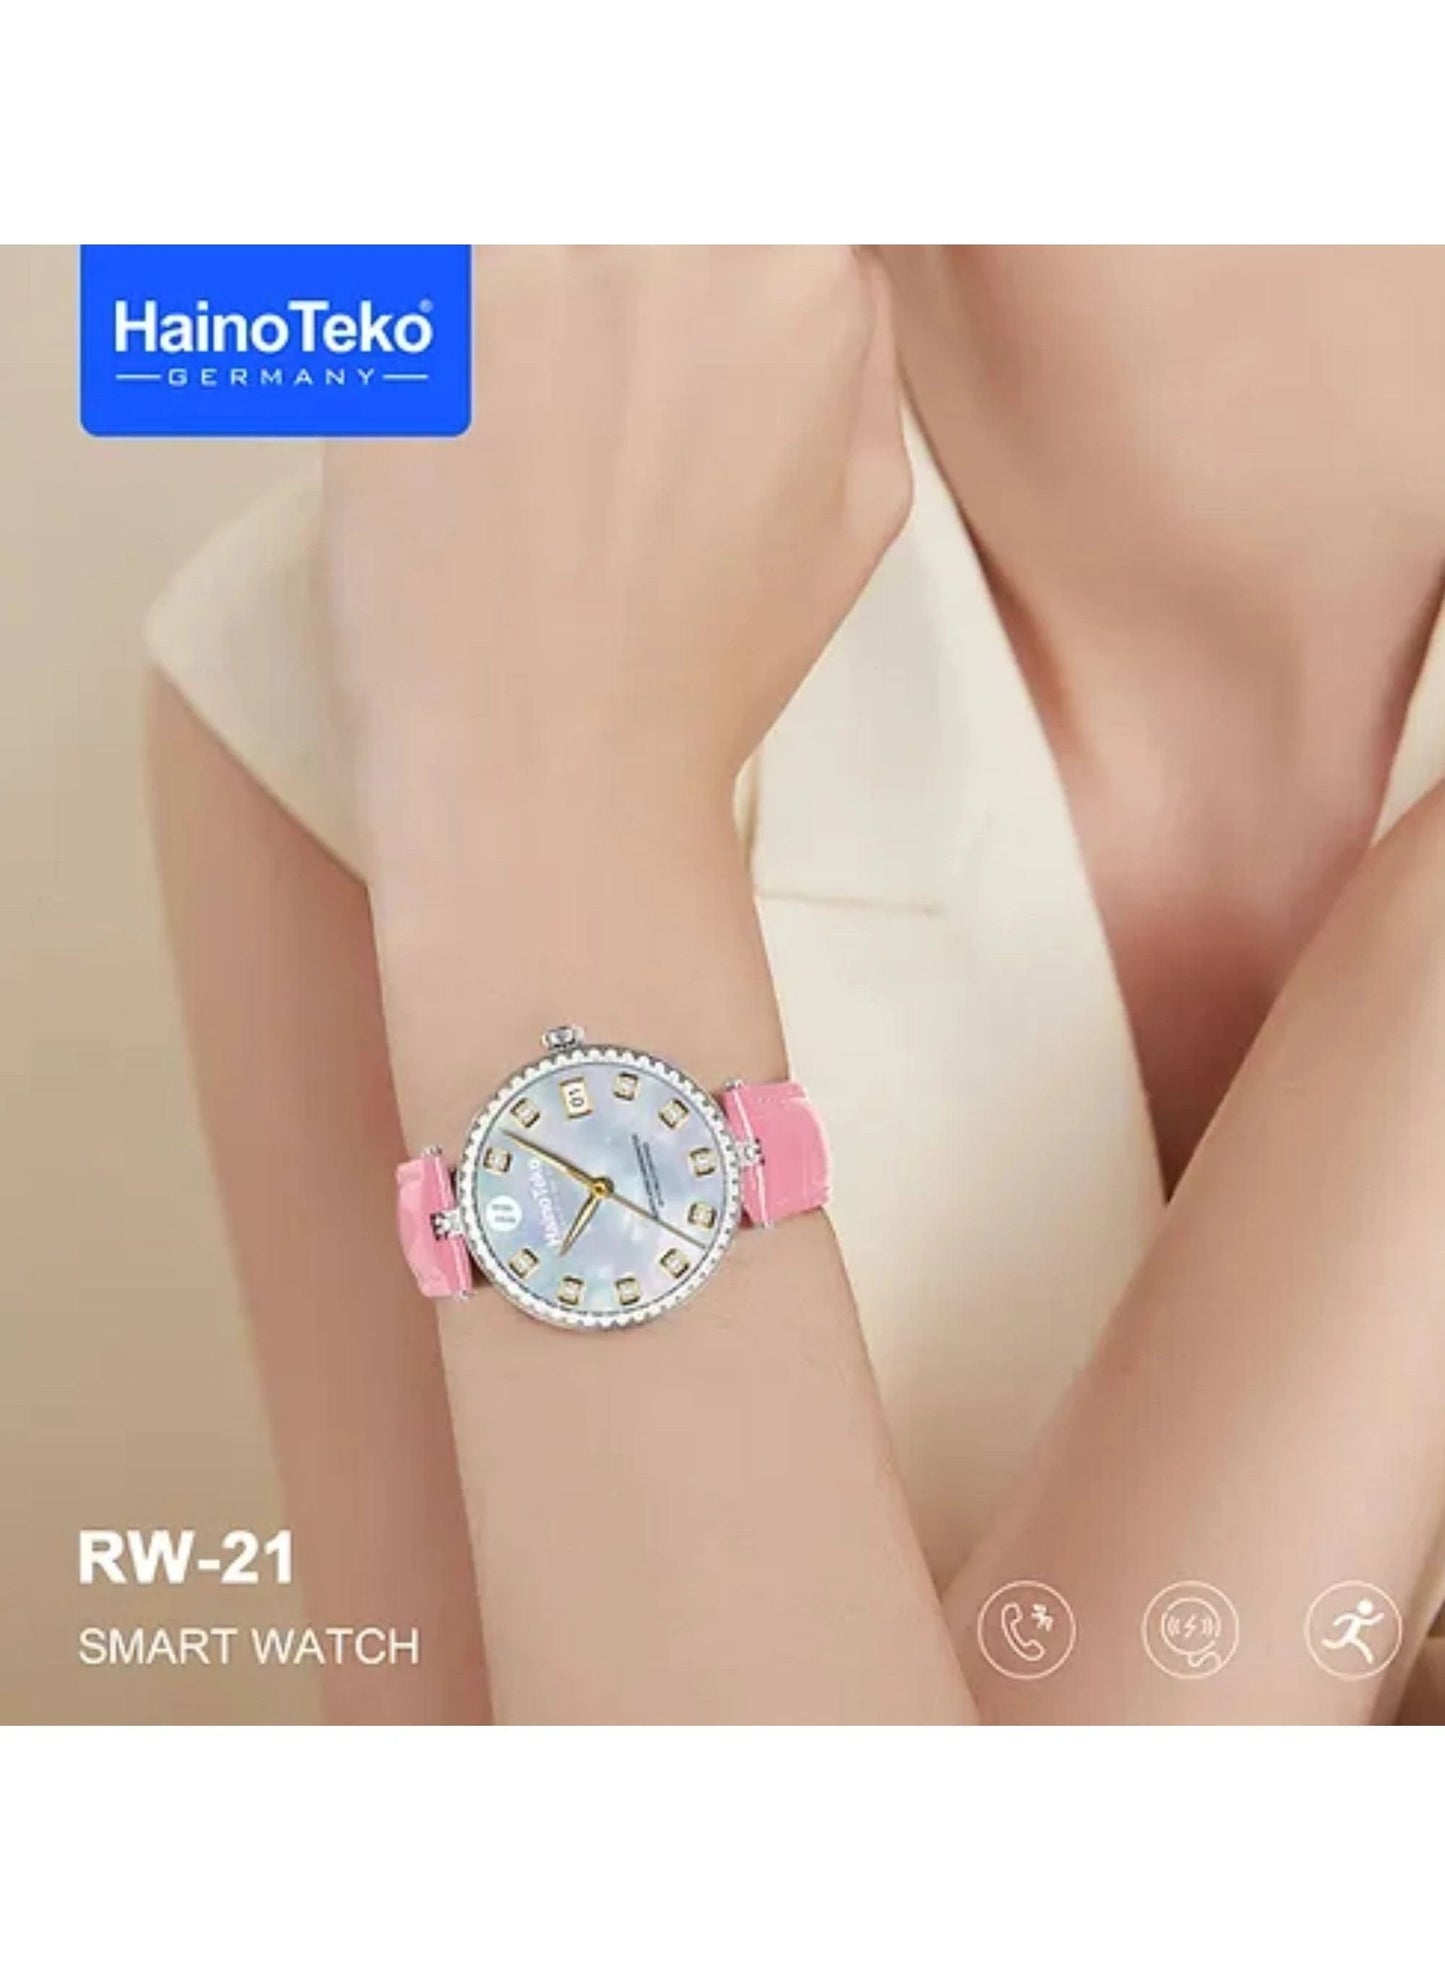 Haino Teko Germany RW21 Smart Watch With 2 pair Strap and Wireless Charger for Ladies